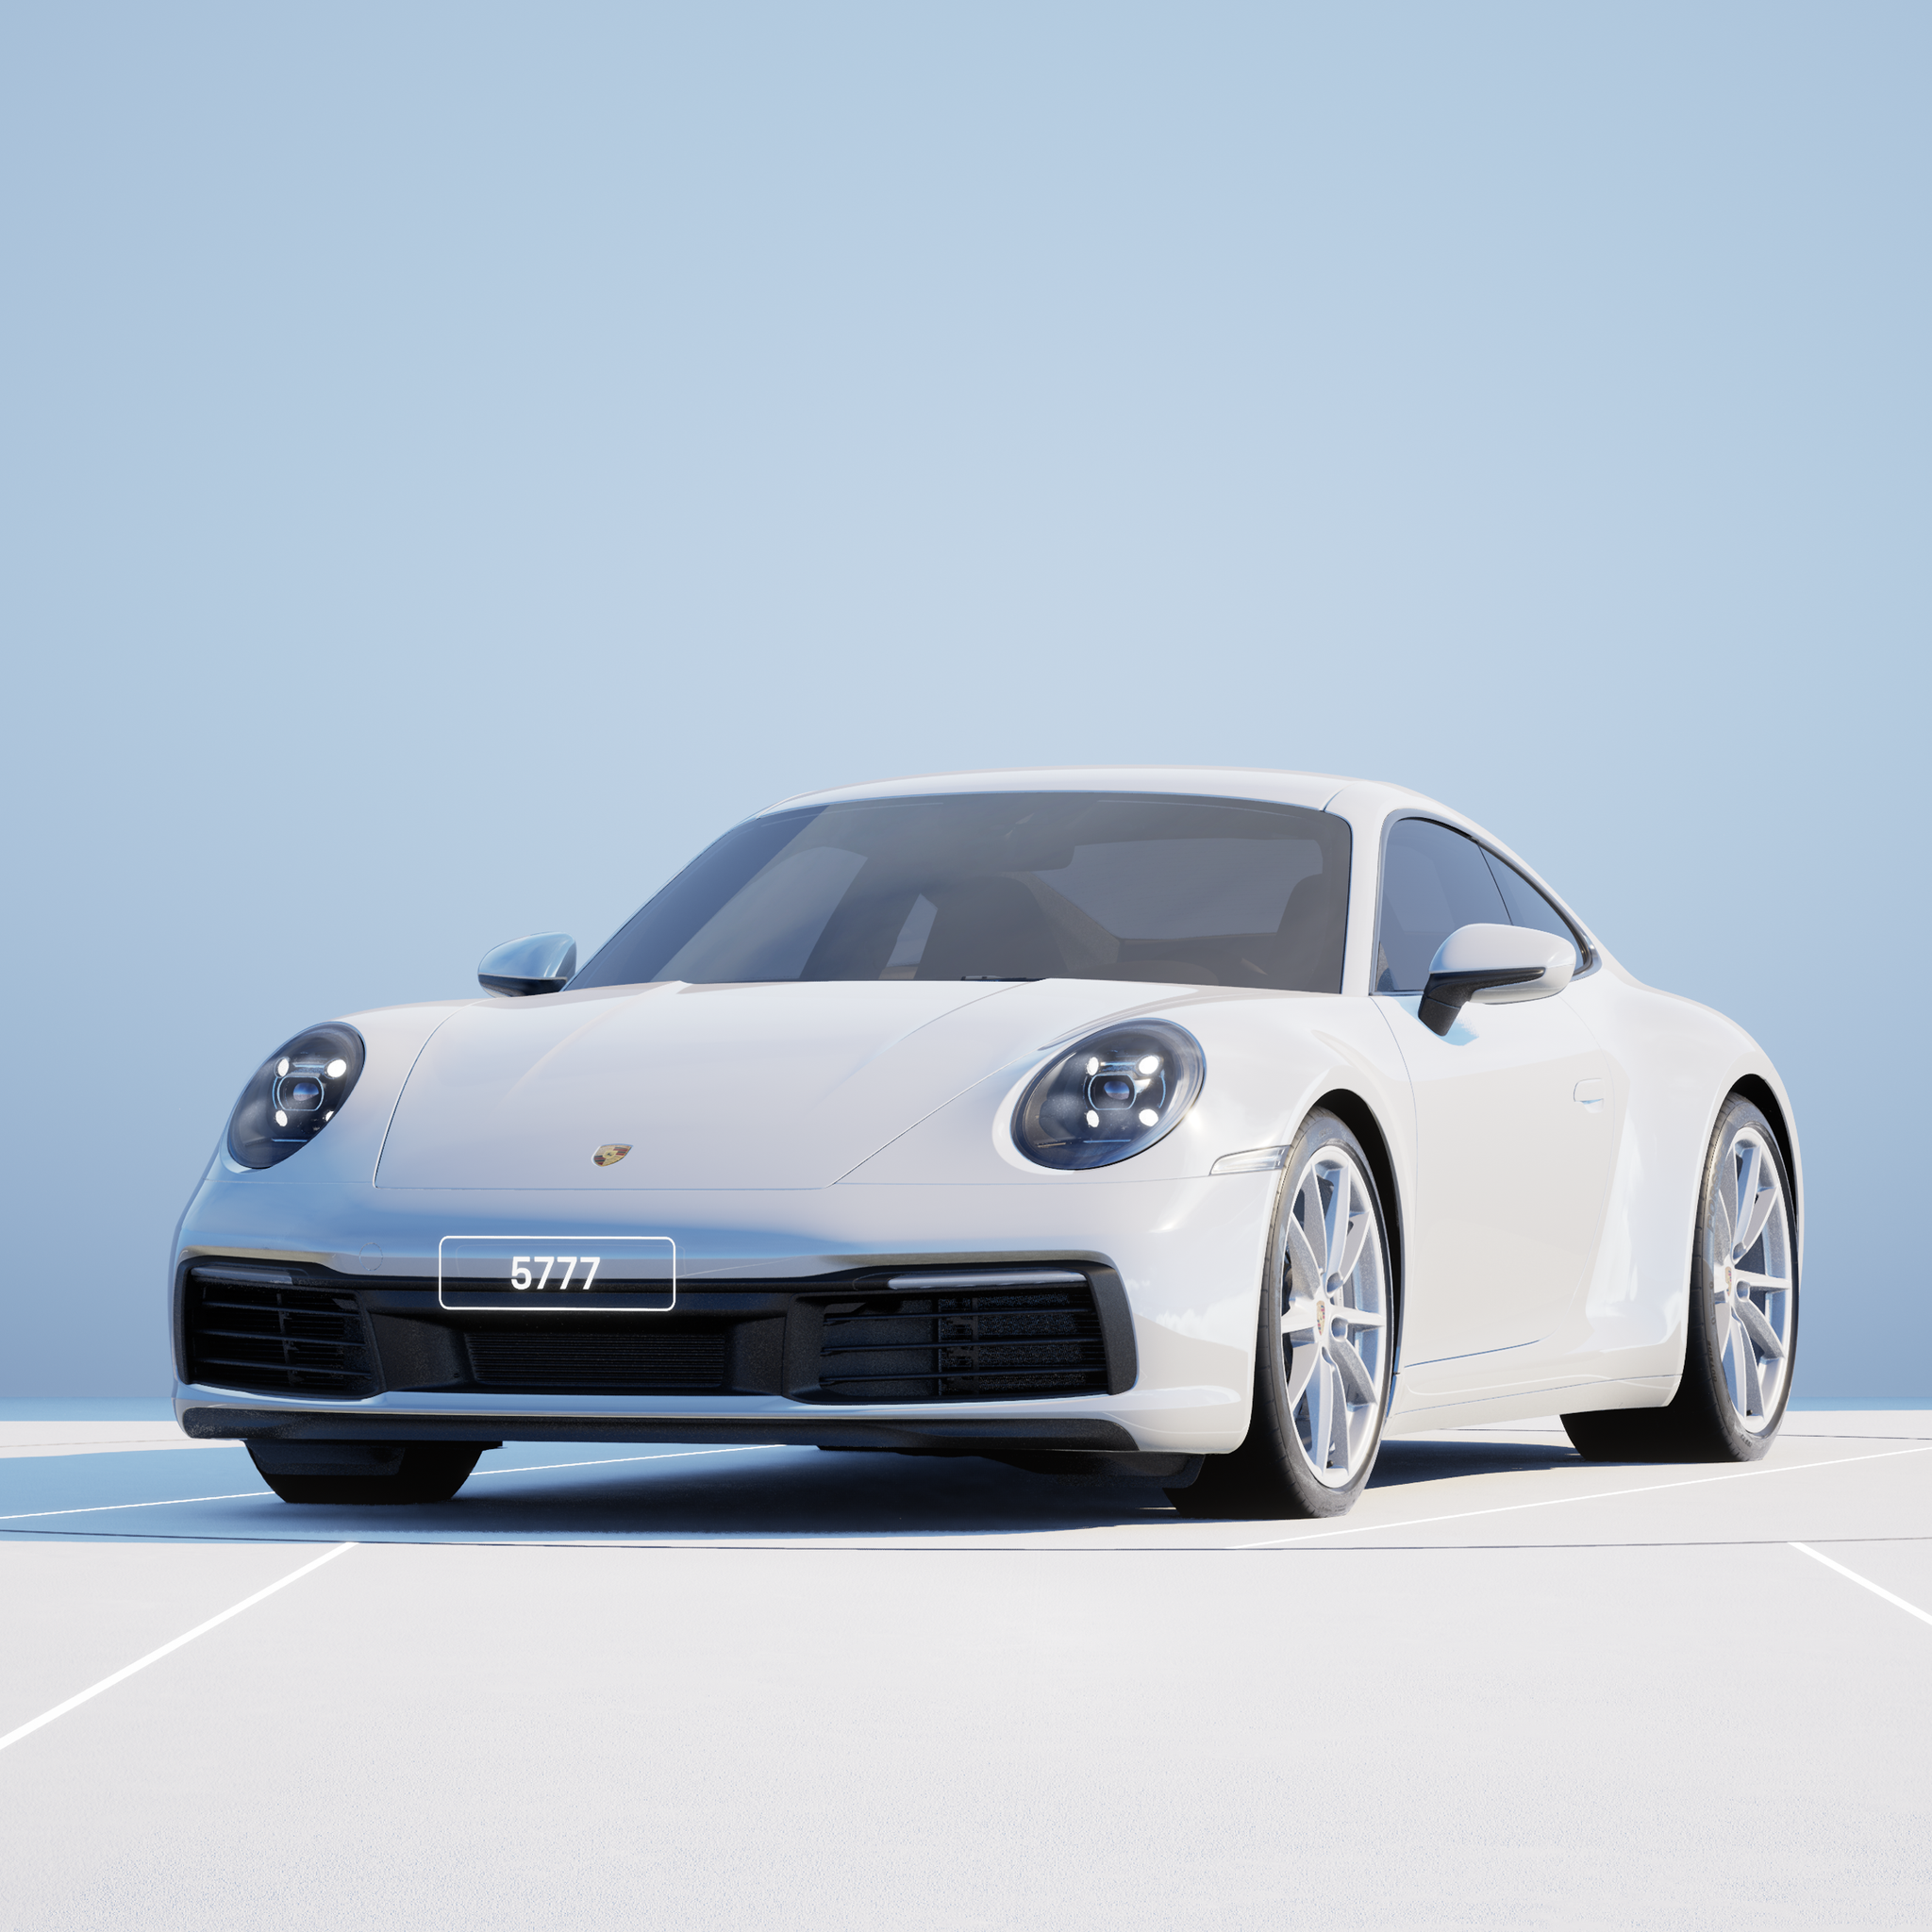 The PORSCHΞ 911 5777 image in phase